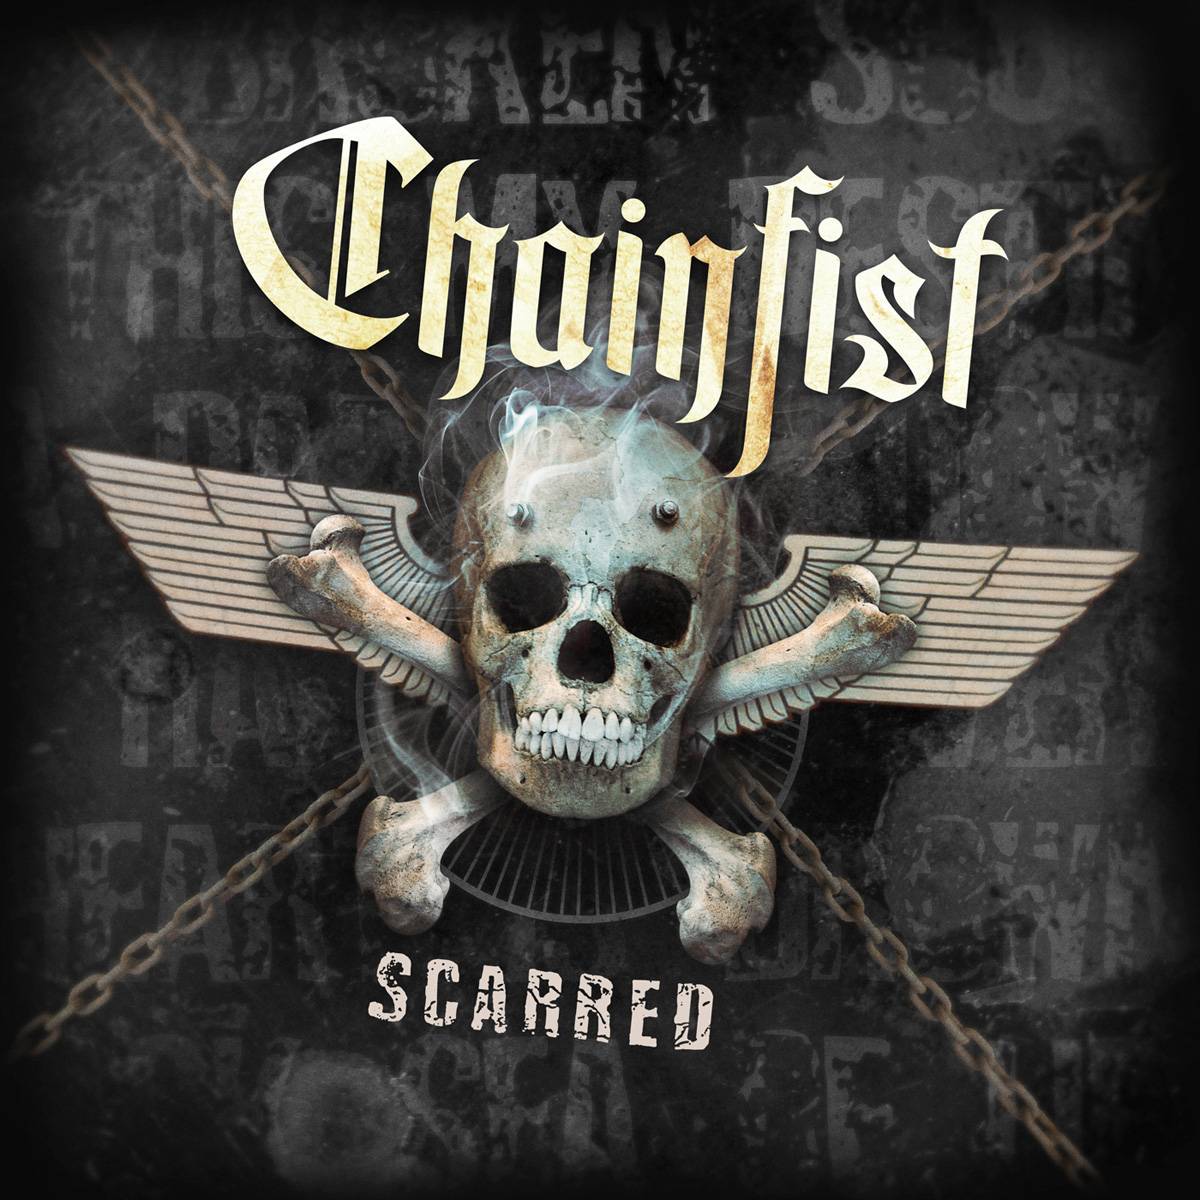 Chainfist Scarred Cover